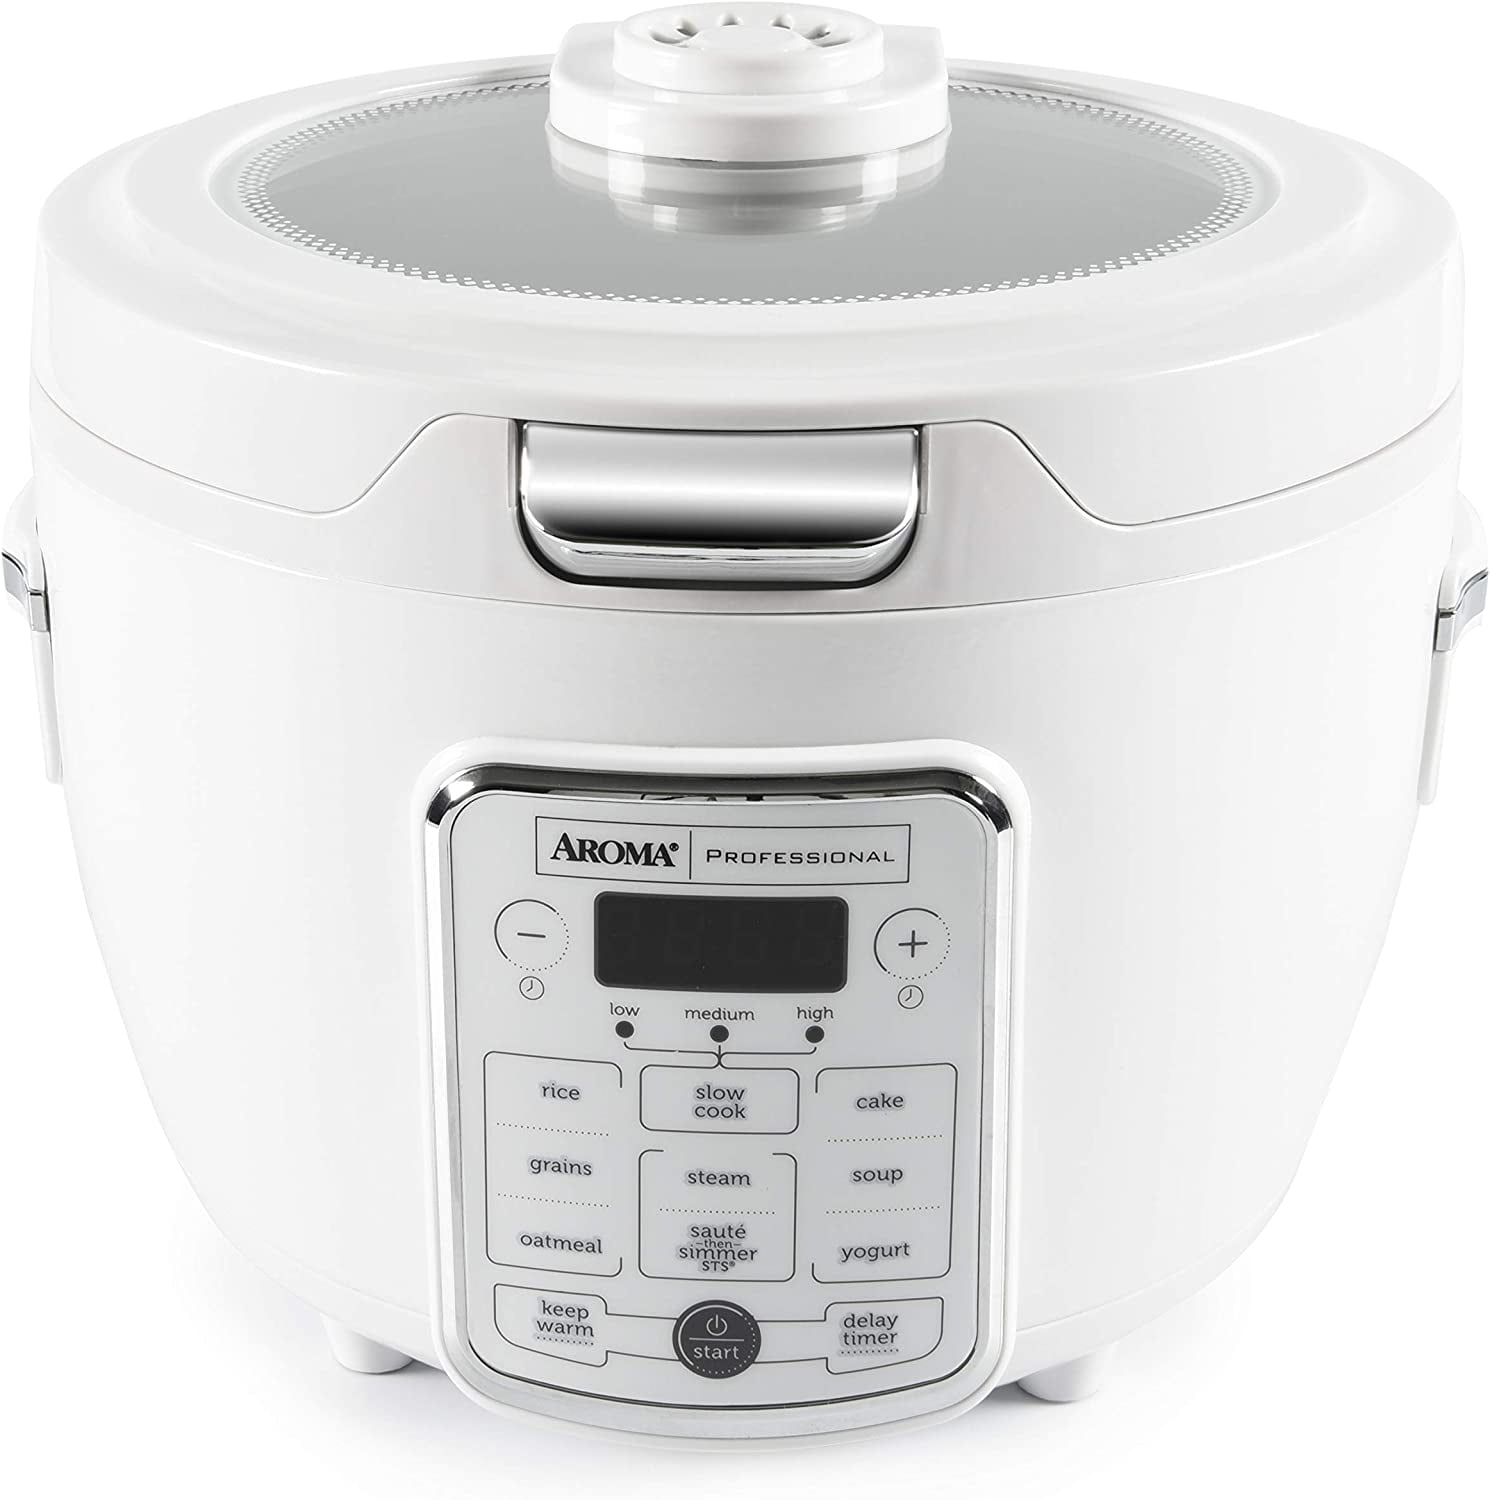 Sybo CFXB100-4B 20 Cup Commercial Grade Rice Cooker Maker and